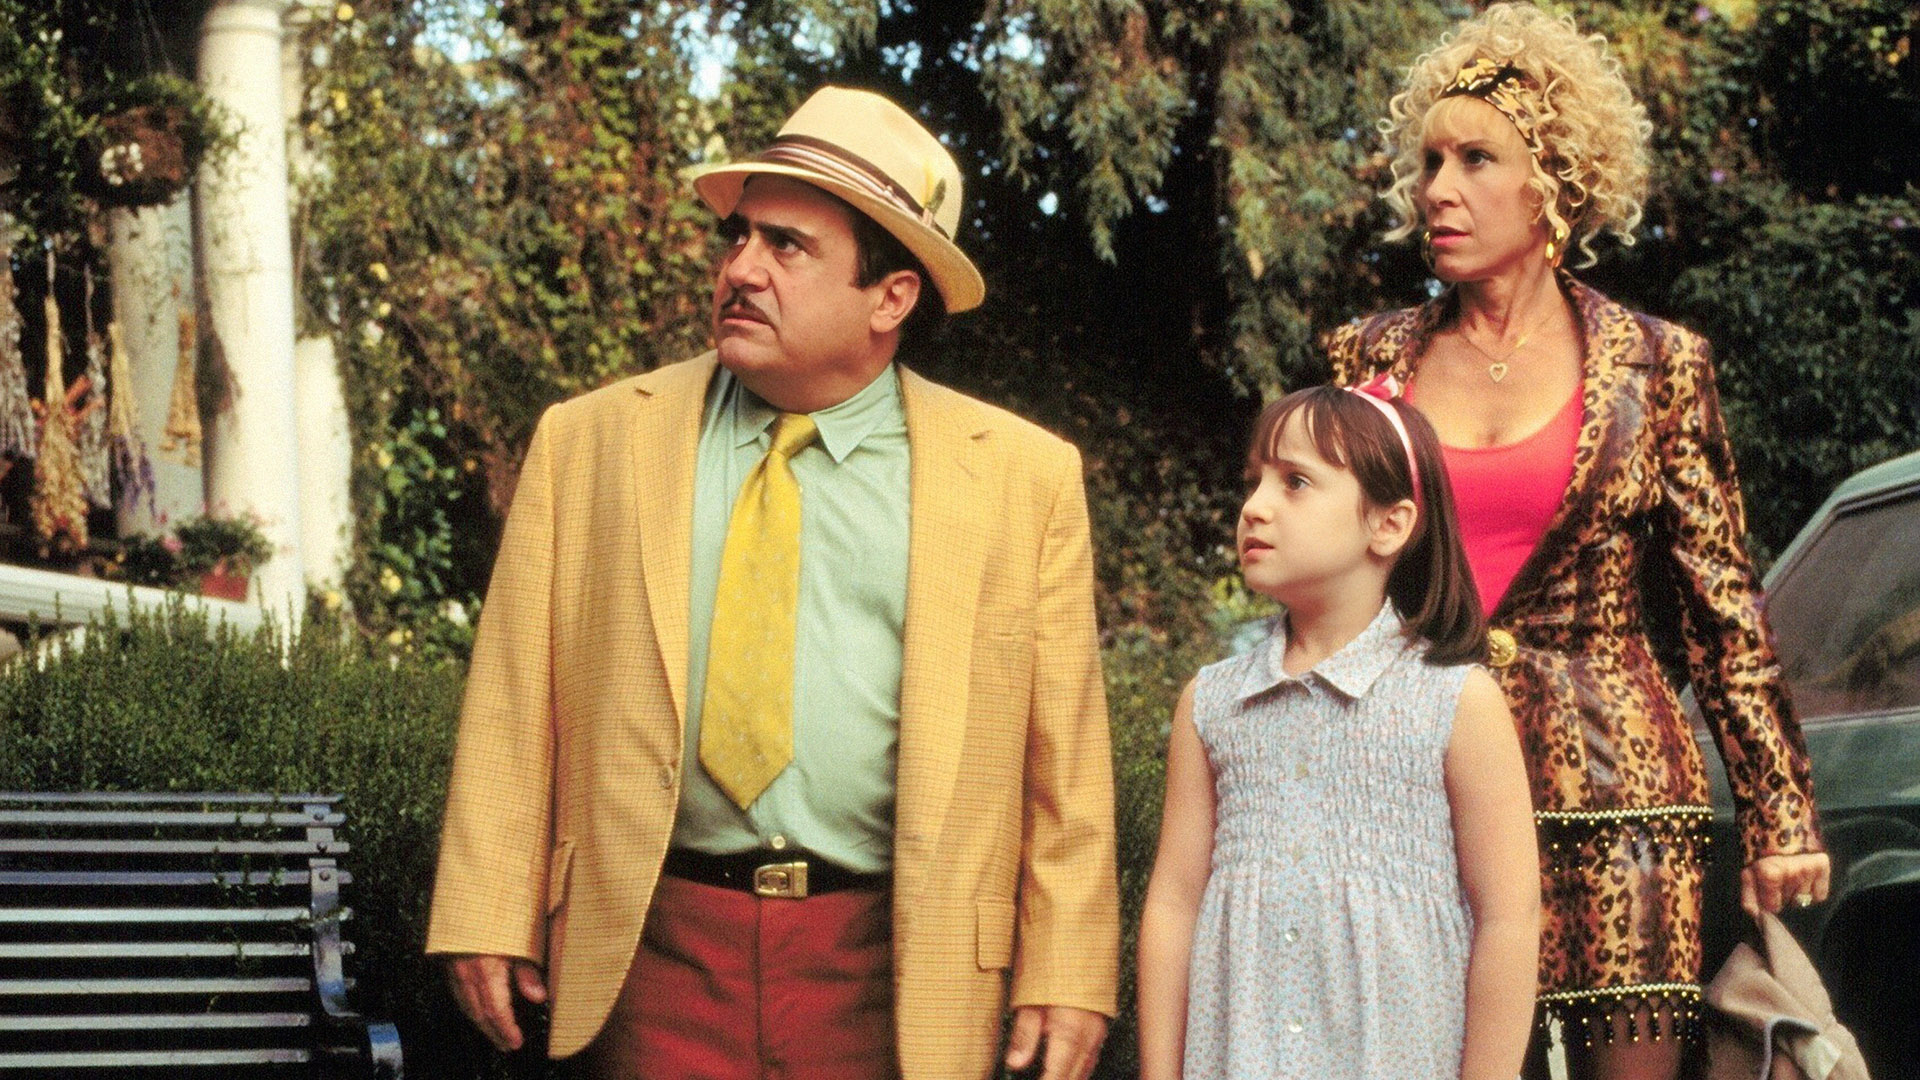 Matilda Star Looks Unrecognisable After Quitting Hollywood to Become a Doctor